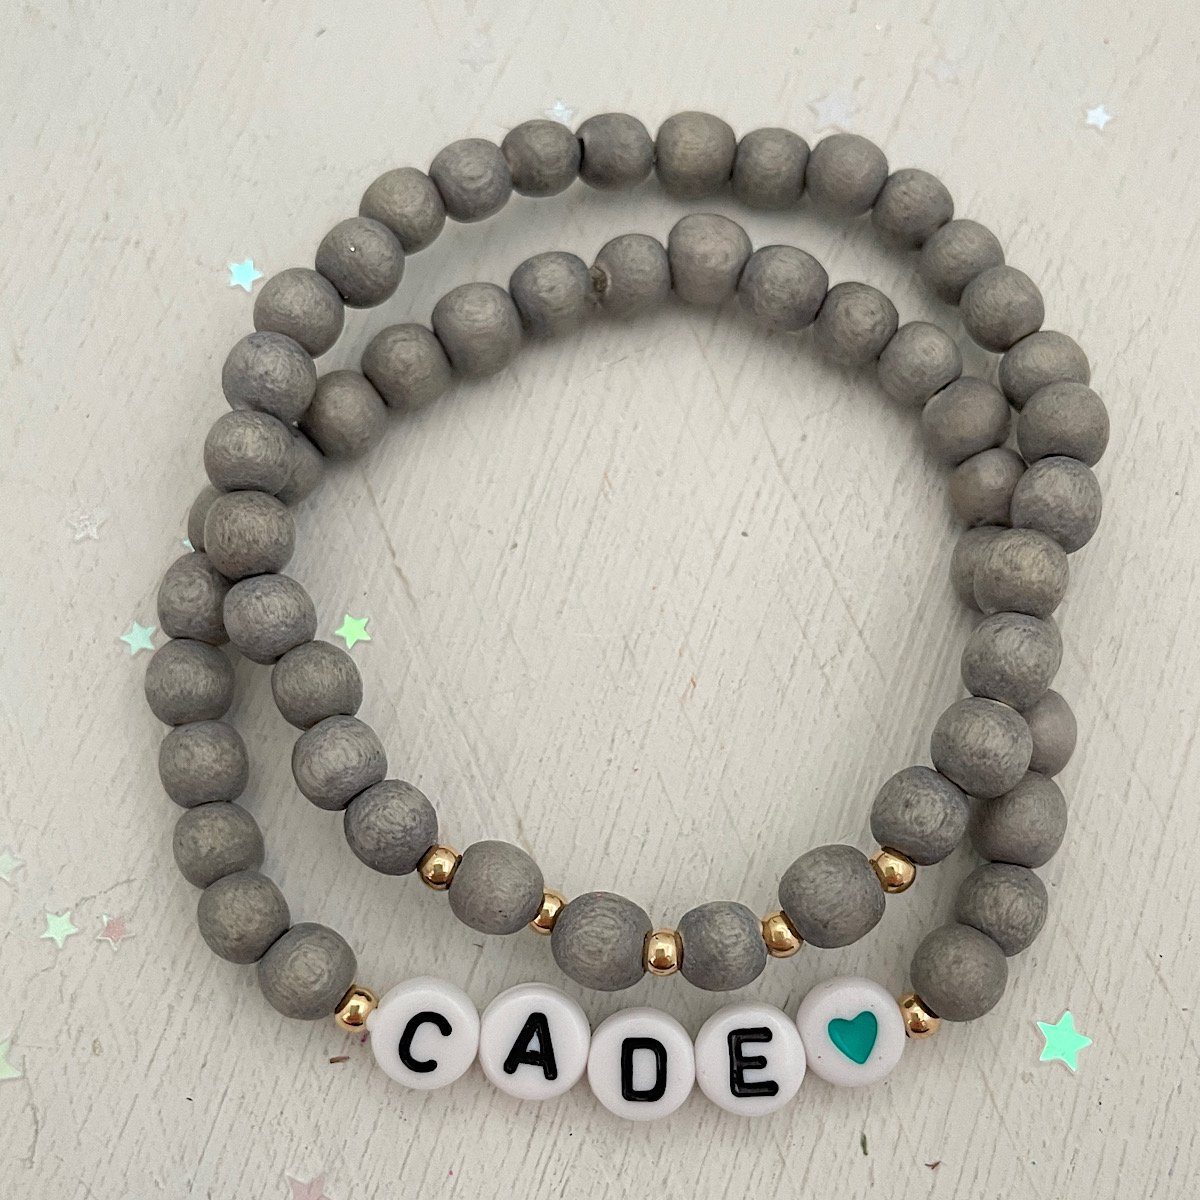 Boys Name Bracelet Wood Beads White/gold Name Letters Stretchy Bracelet  With Gold Spacers - Etsy